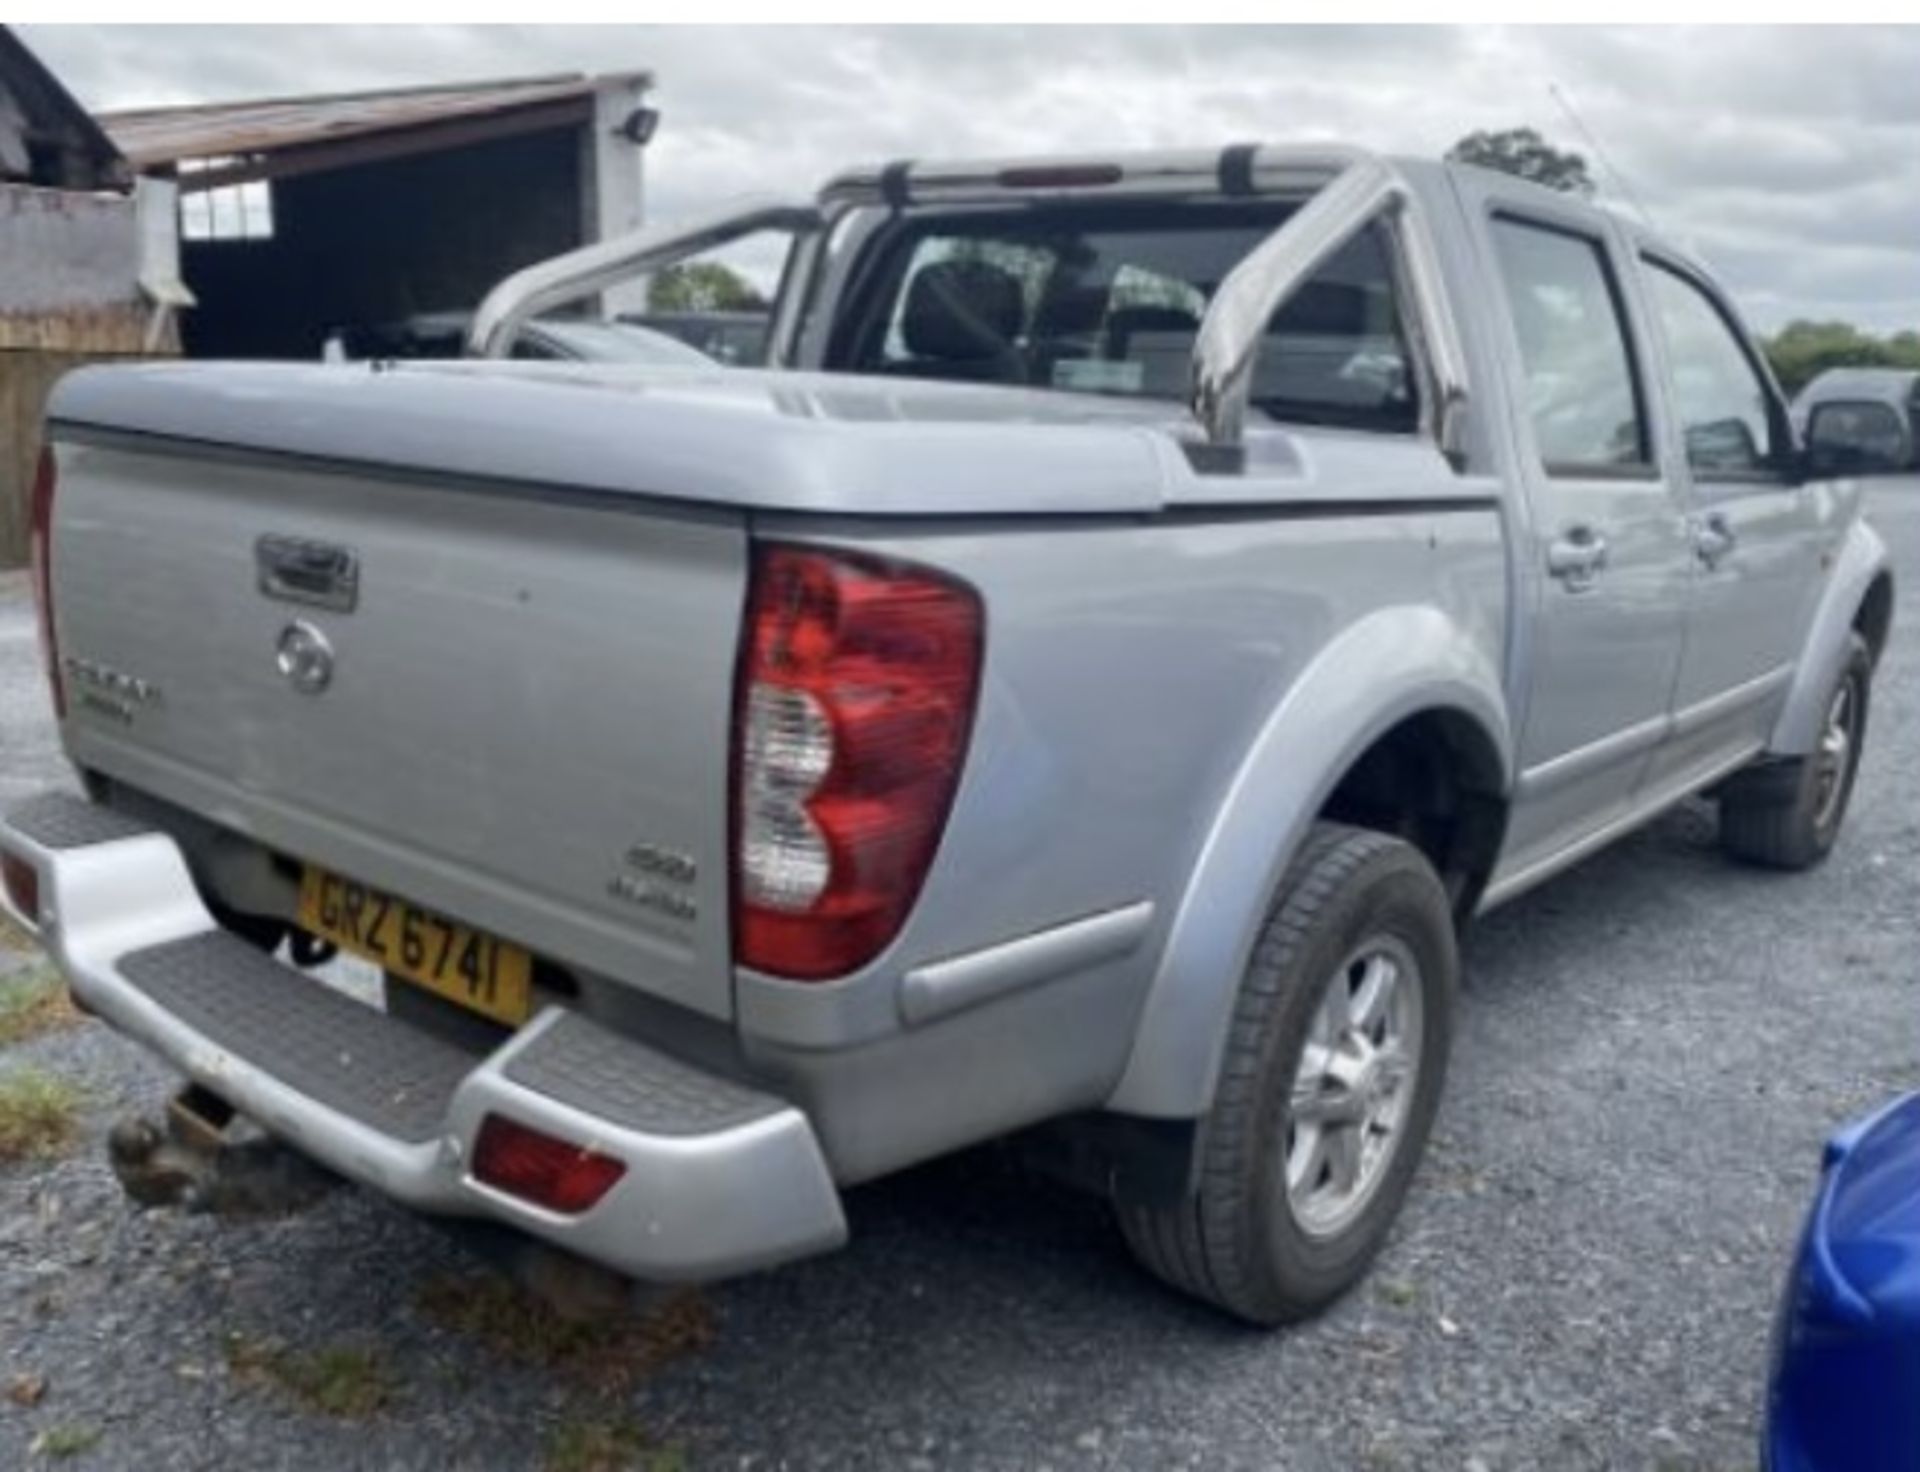 2013 GREAT WALL STEED 2.0 TD 4X4 PICK UP LOCATION N IRELAND - Image 5 of 7